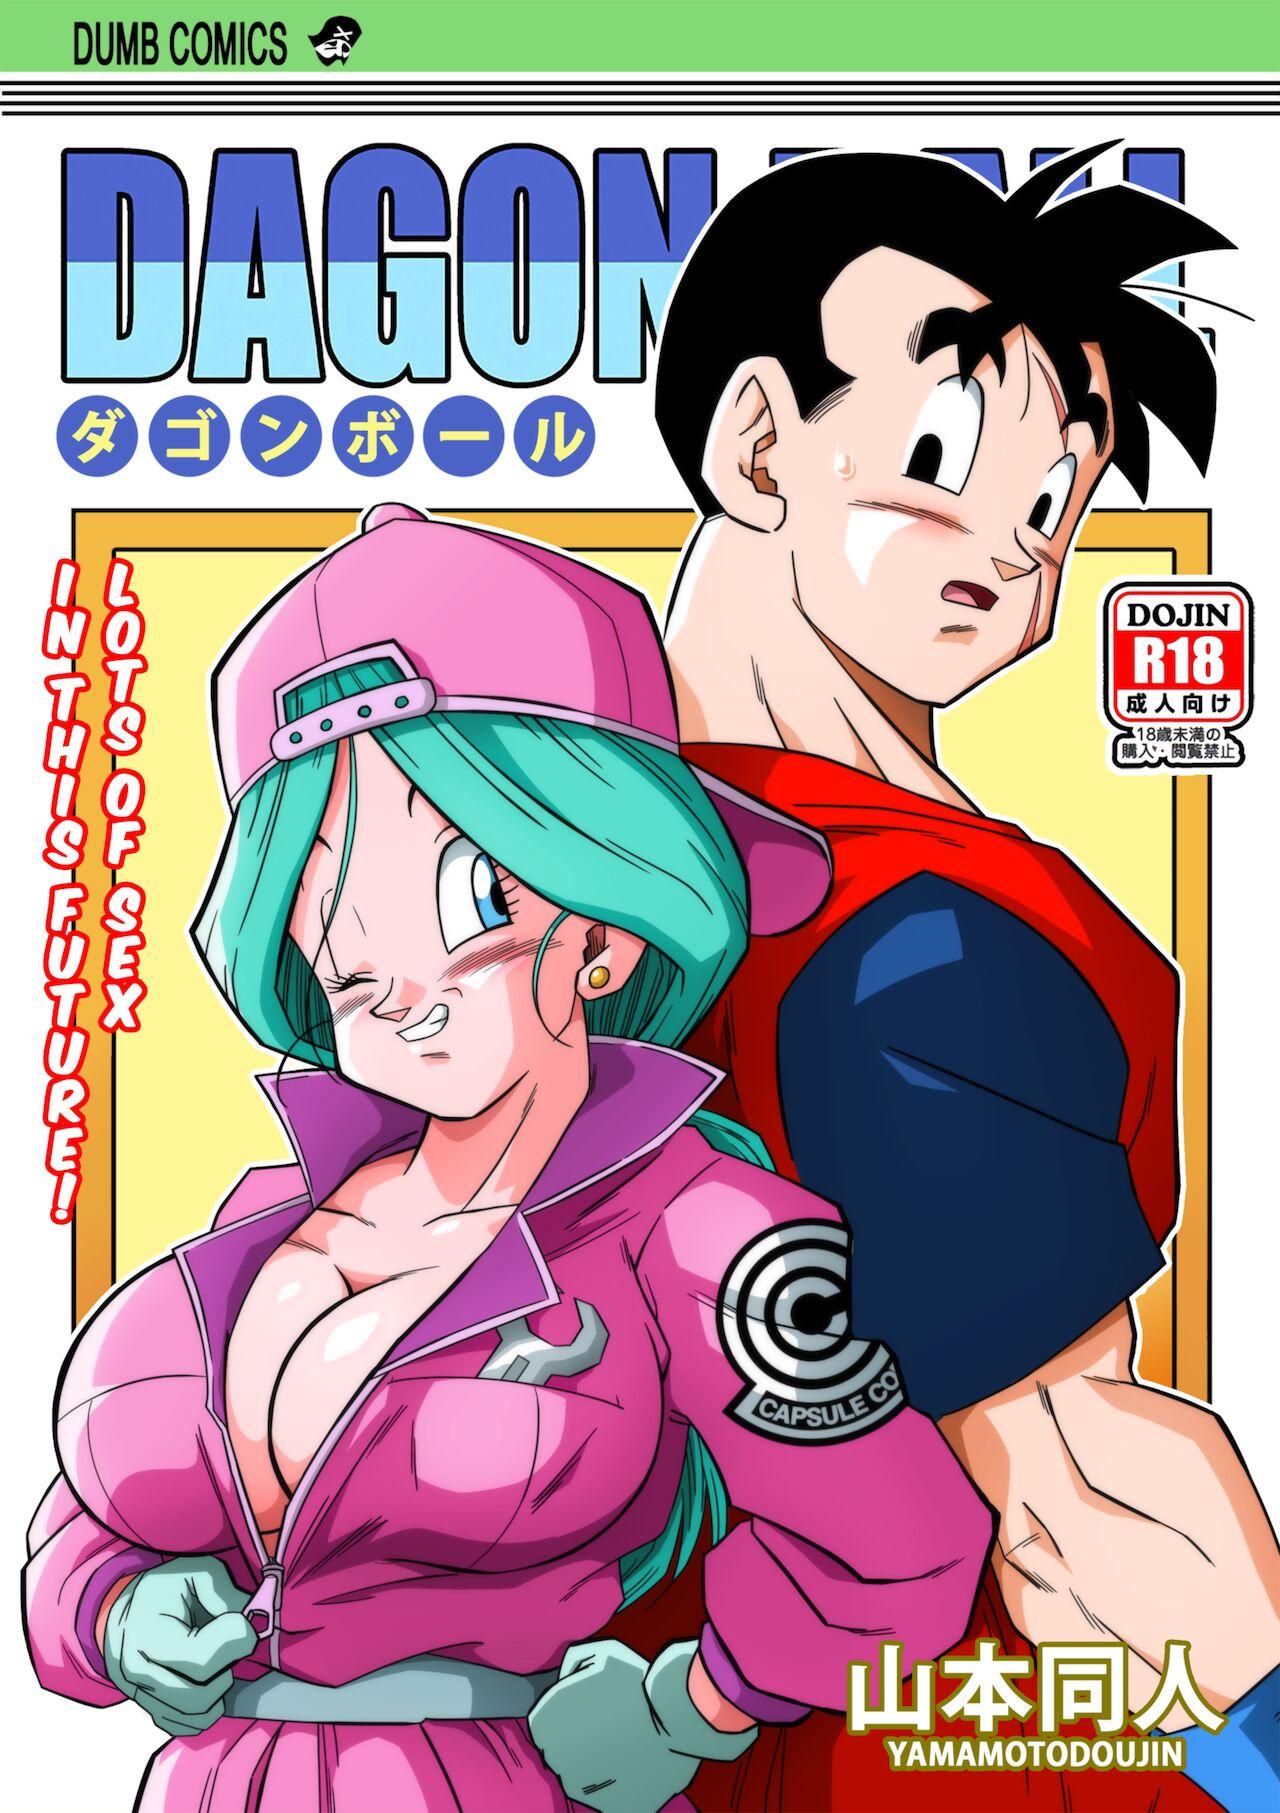 Fat Lots of Sex in this Future!! - Dragon ball z Lovers - Page 1